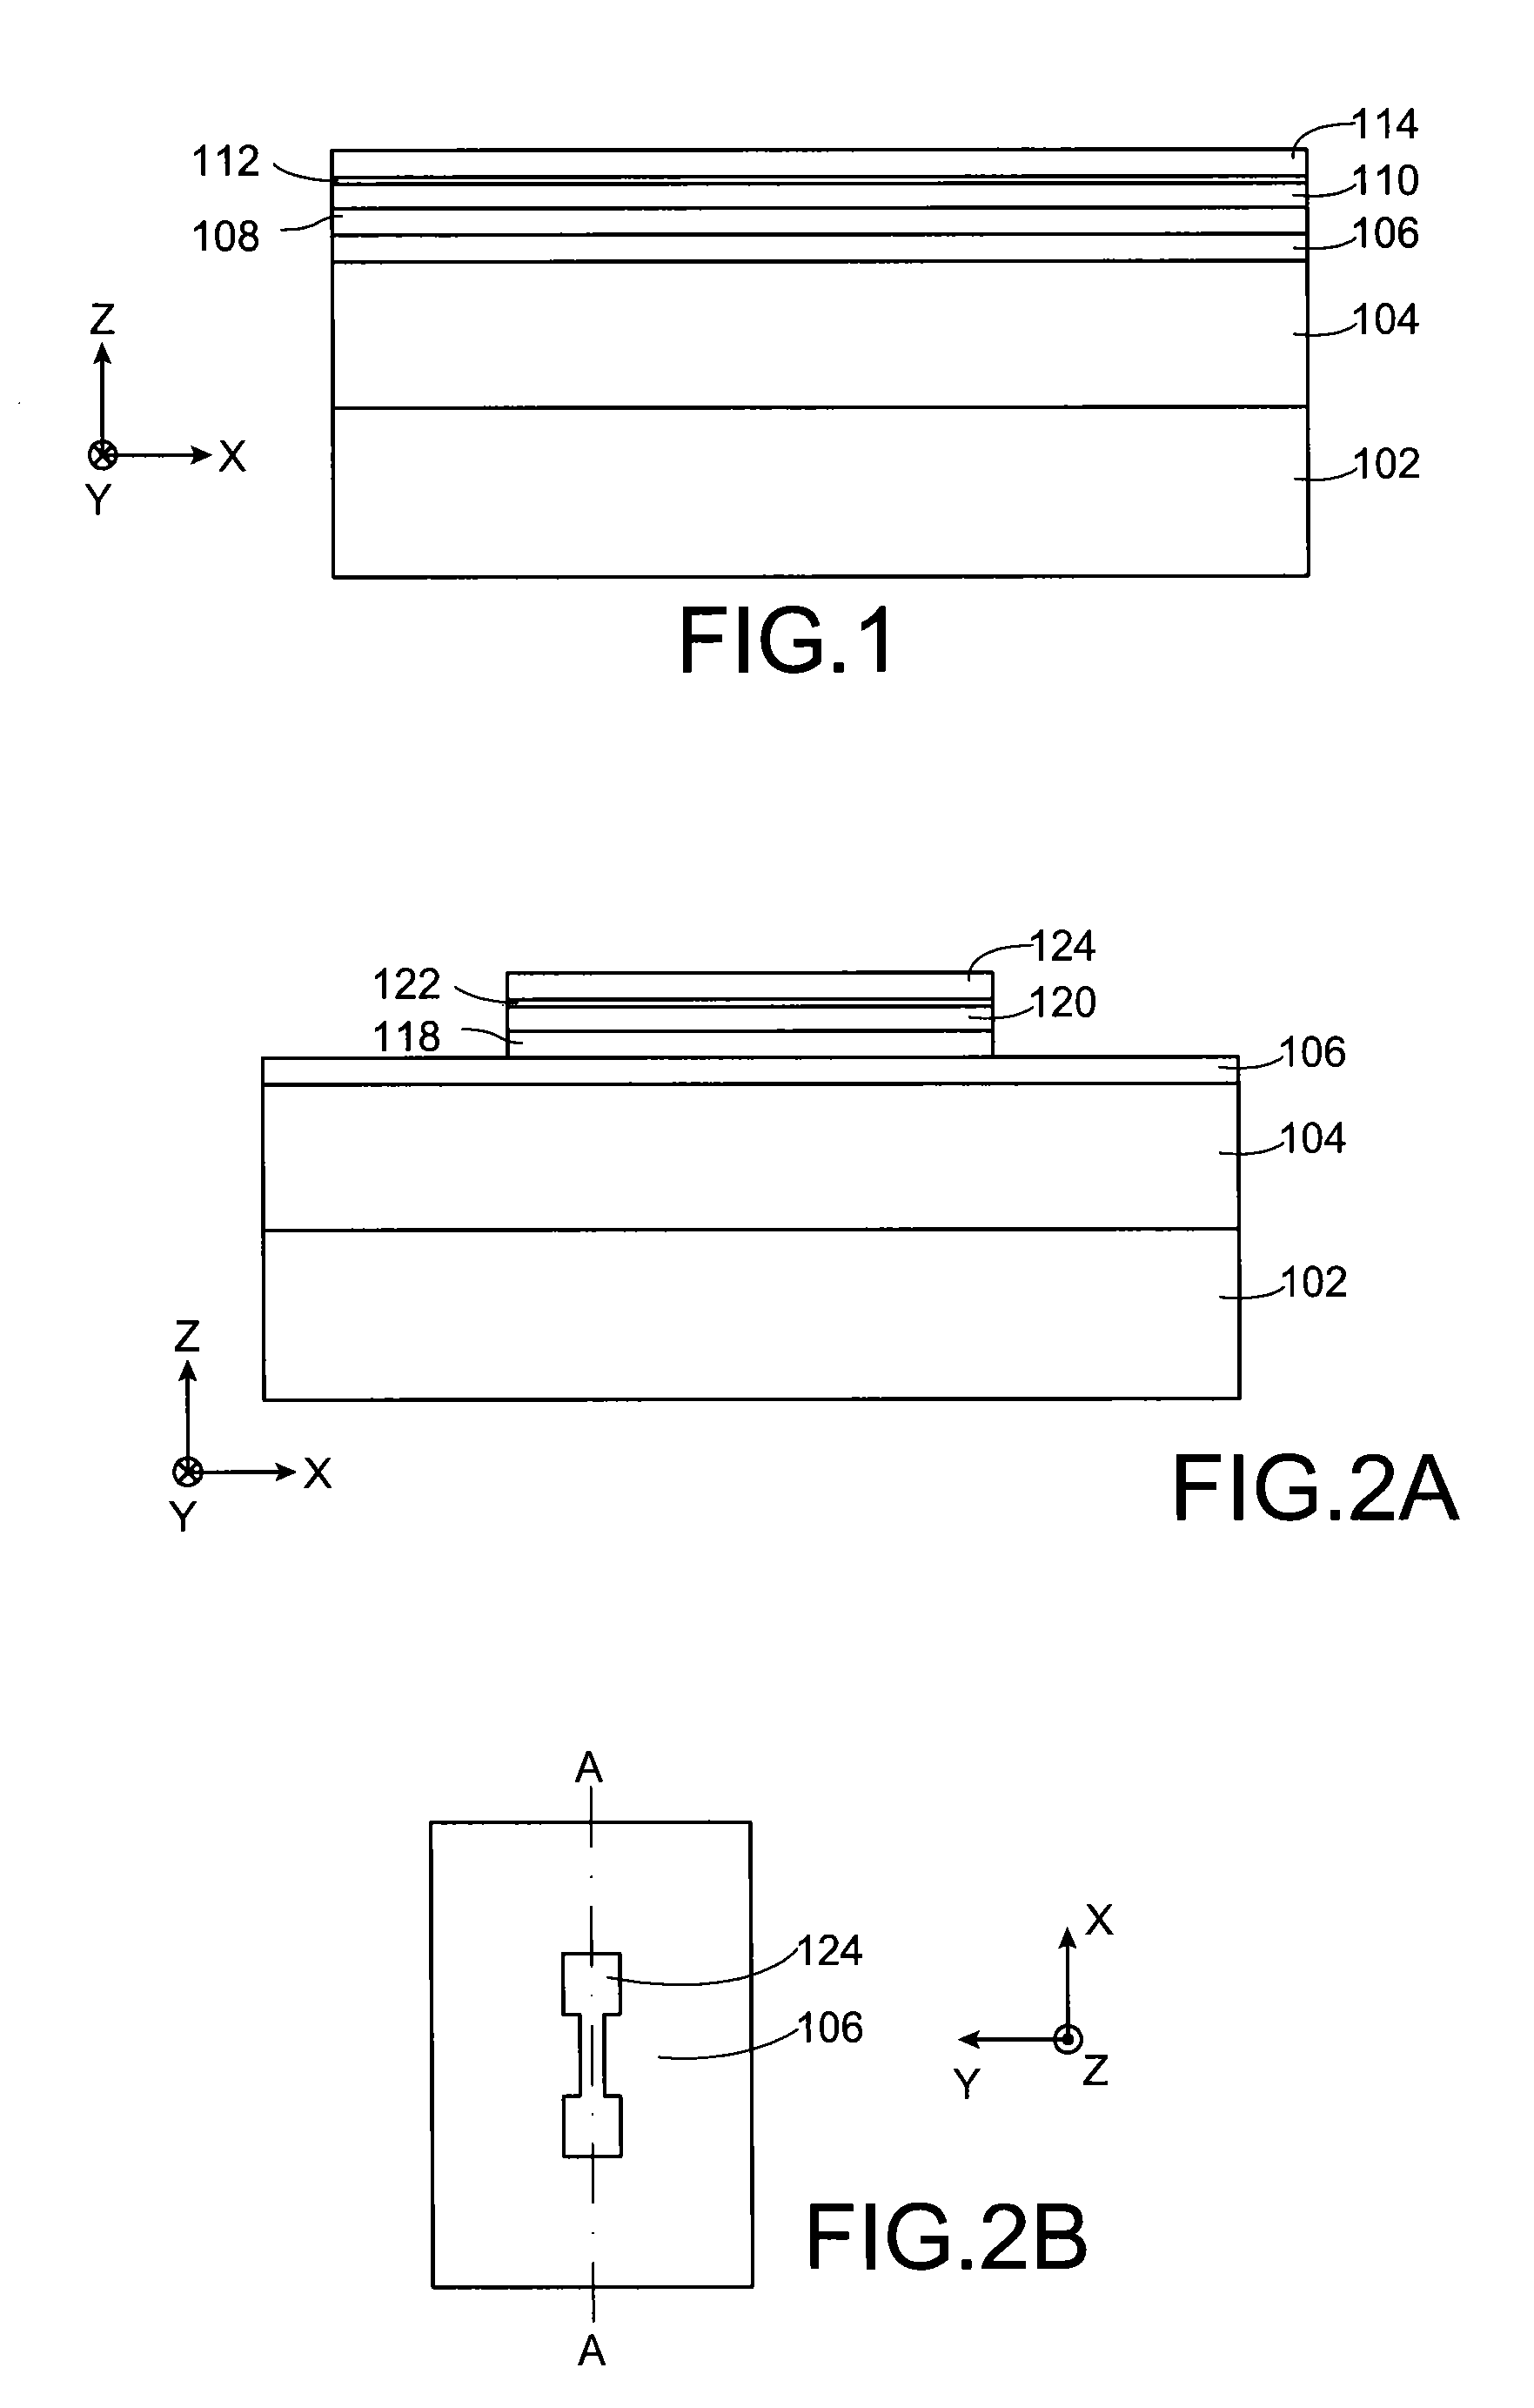 Method of producing a three-dimensional integrated circuit